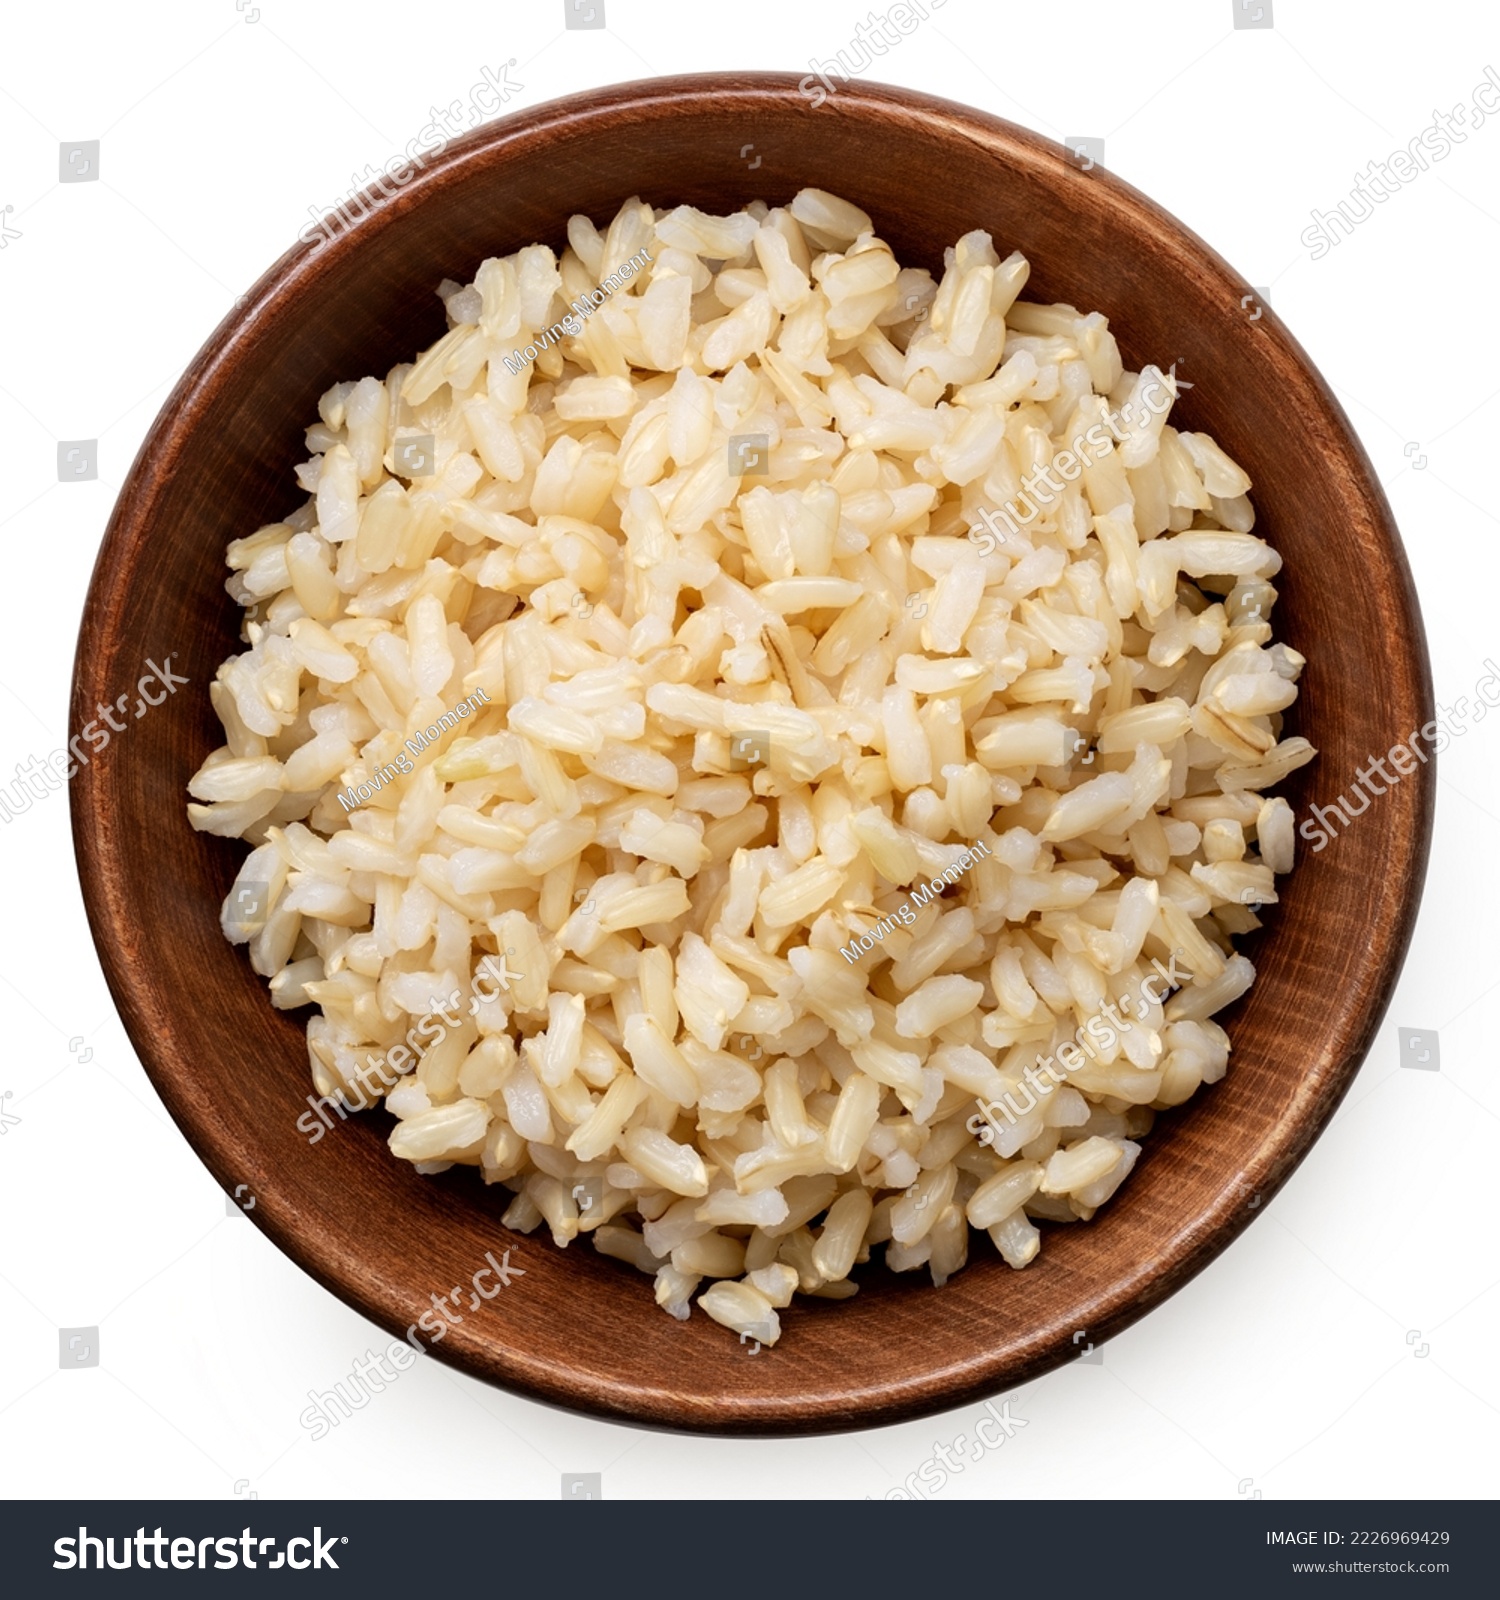 Brown cooked rice in a brown wood bowl isolated on white. Top view. #2226969429